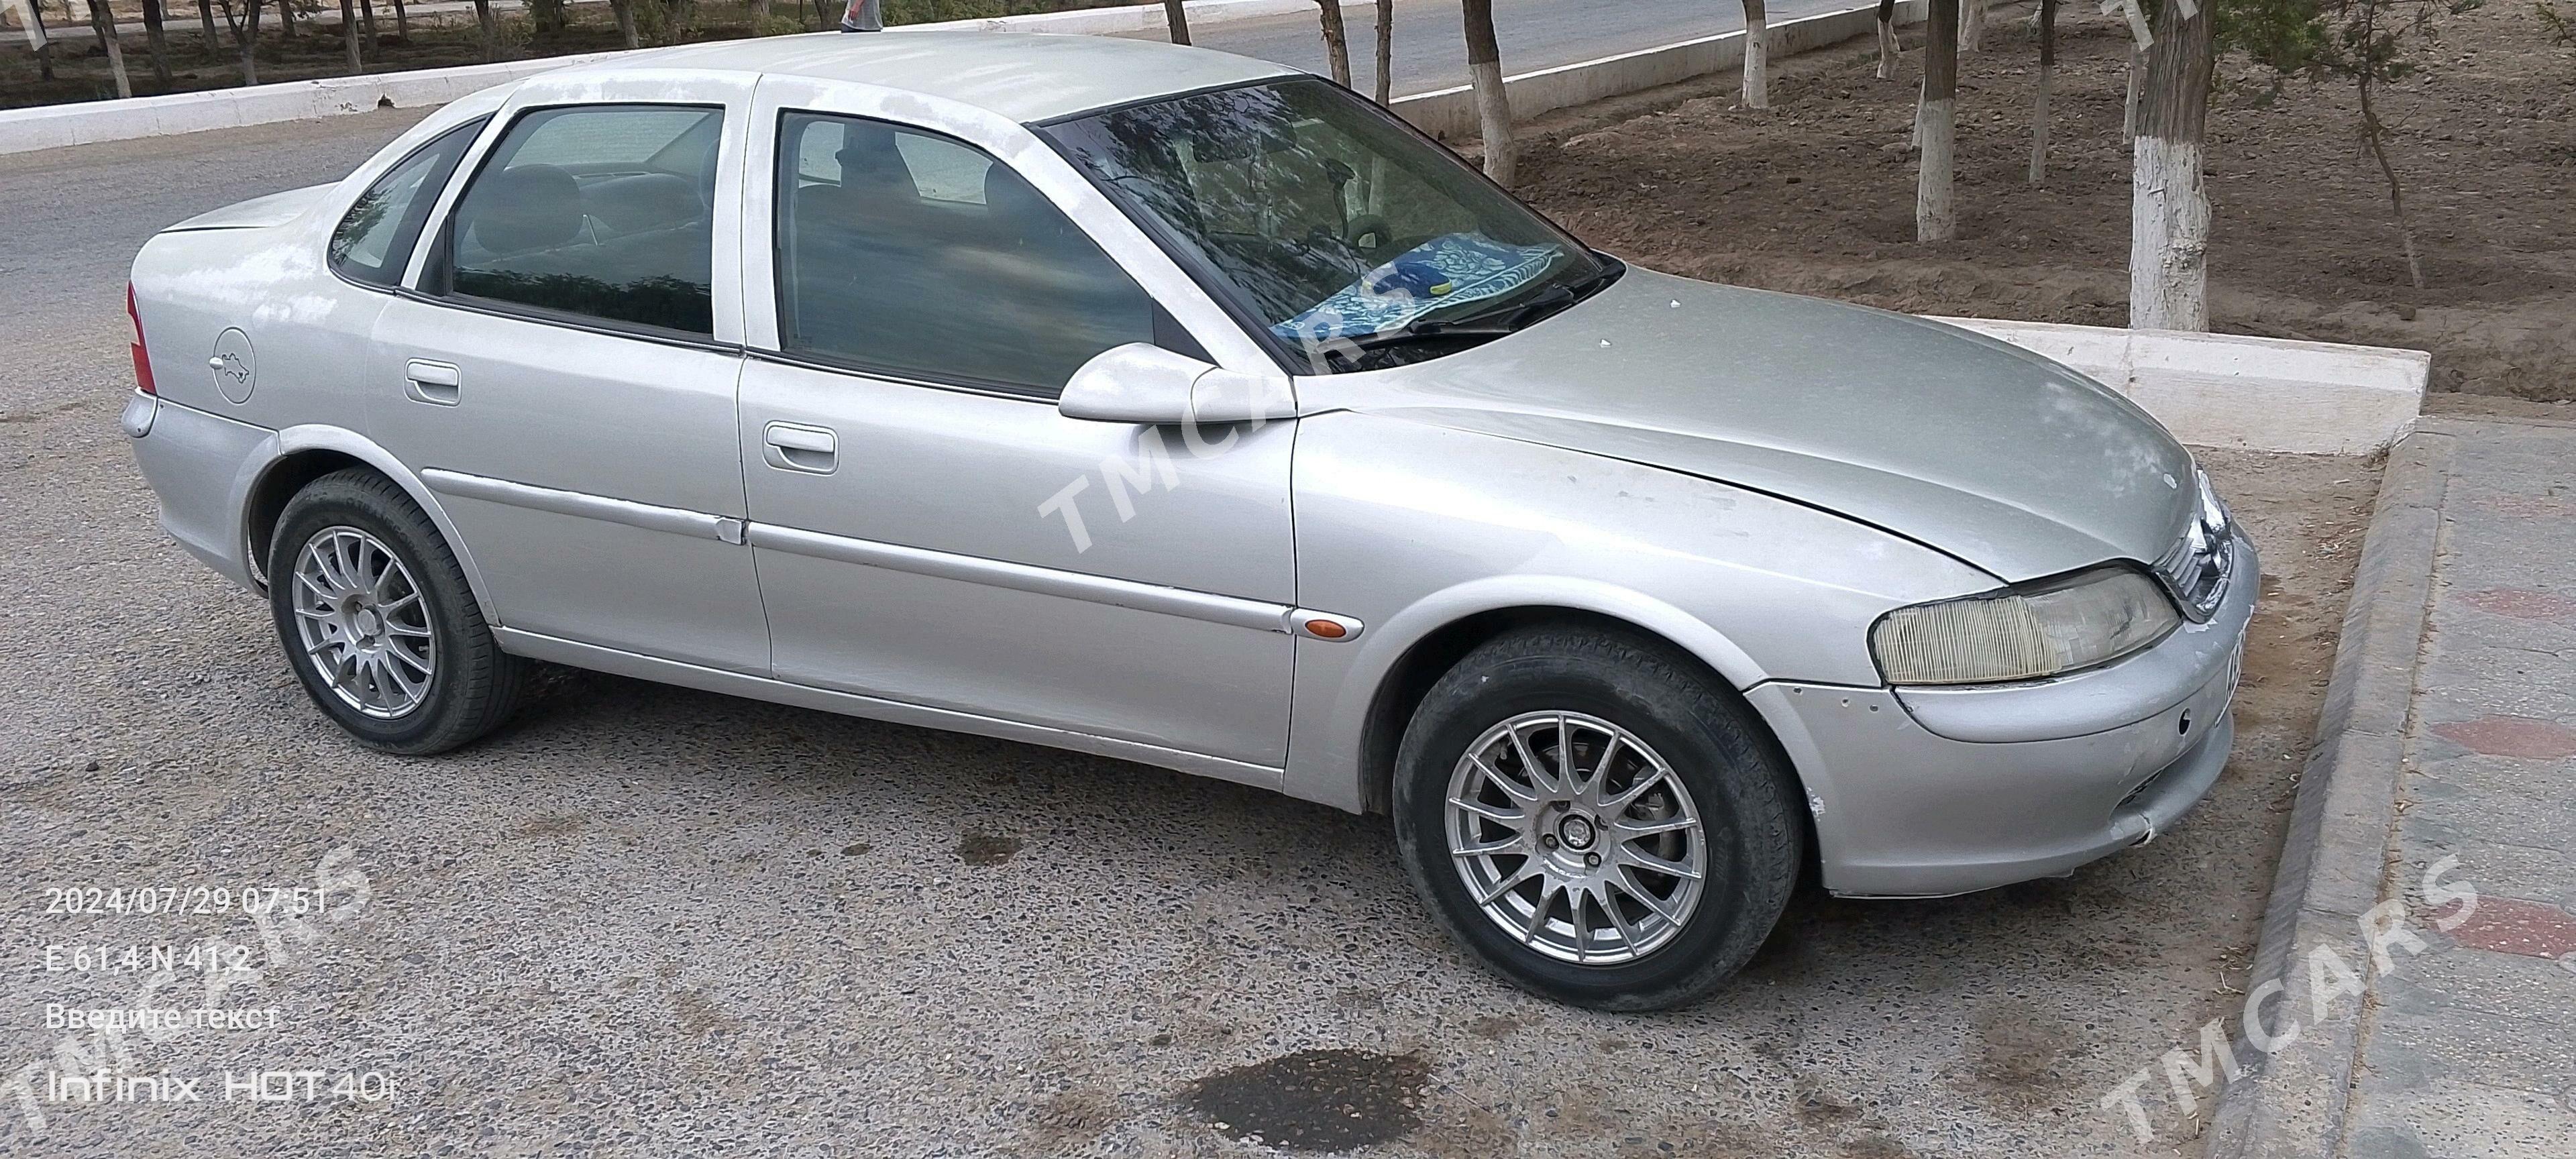 Opel Vectra 1998 - 28 000 TMT - Ёлётен - img 2